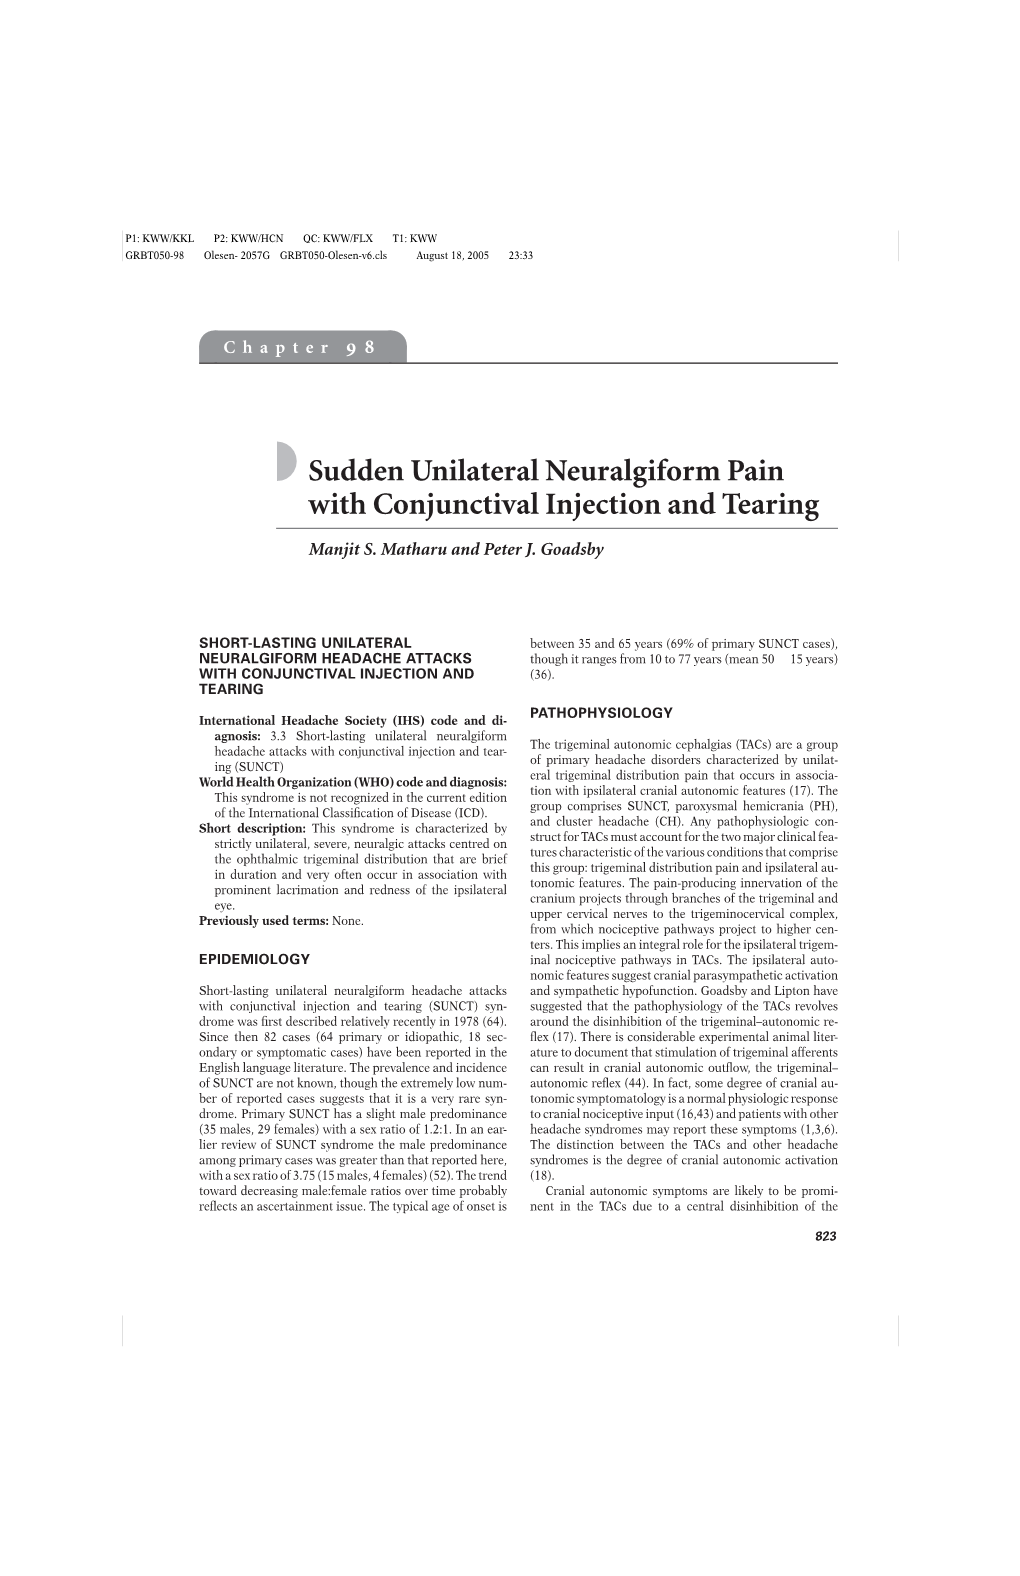 Sudden Unilateral Neuralgiform Pain with Conjunctival Injection and Tearing